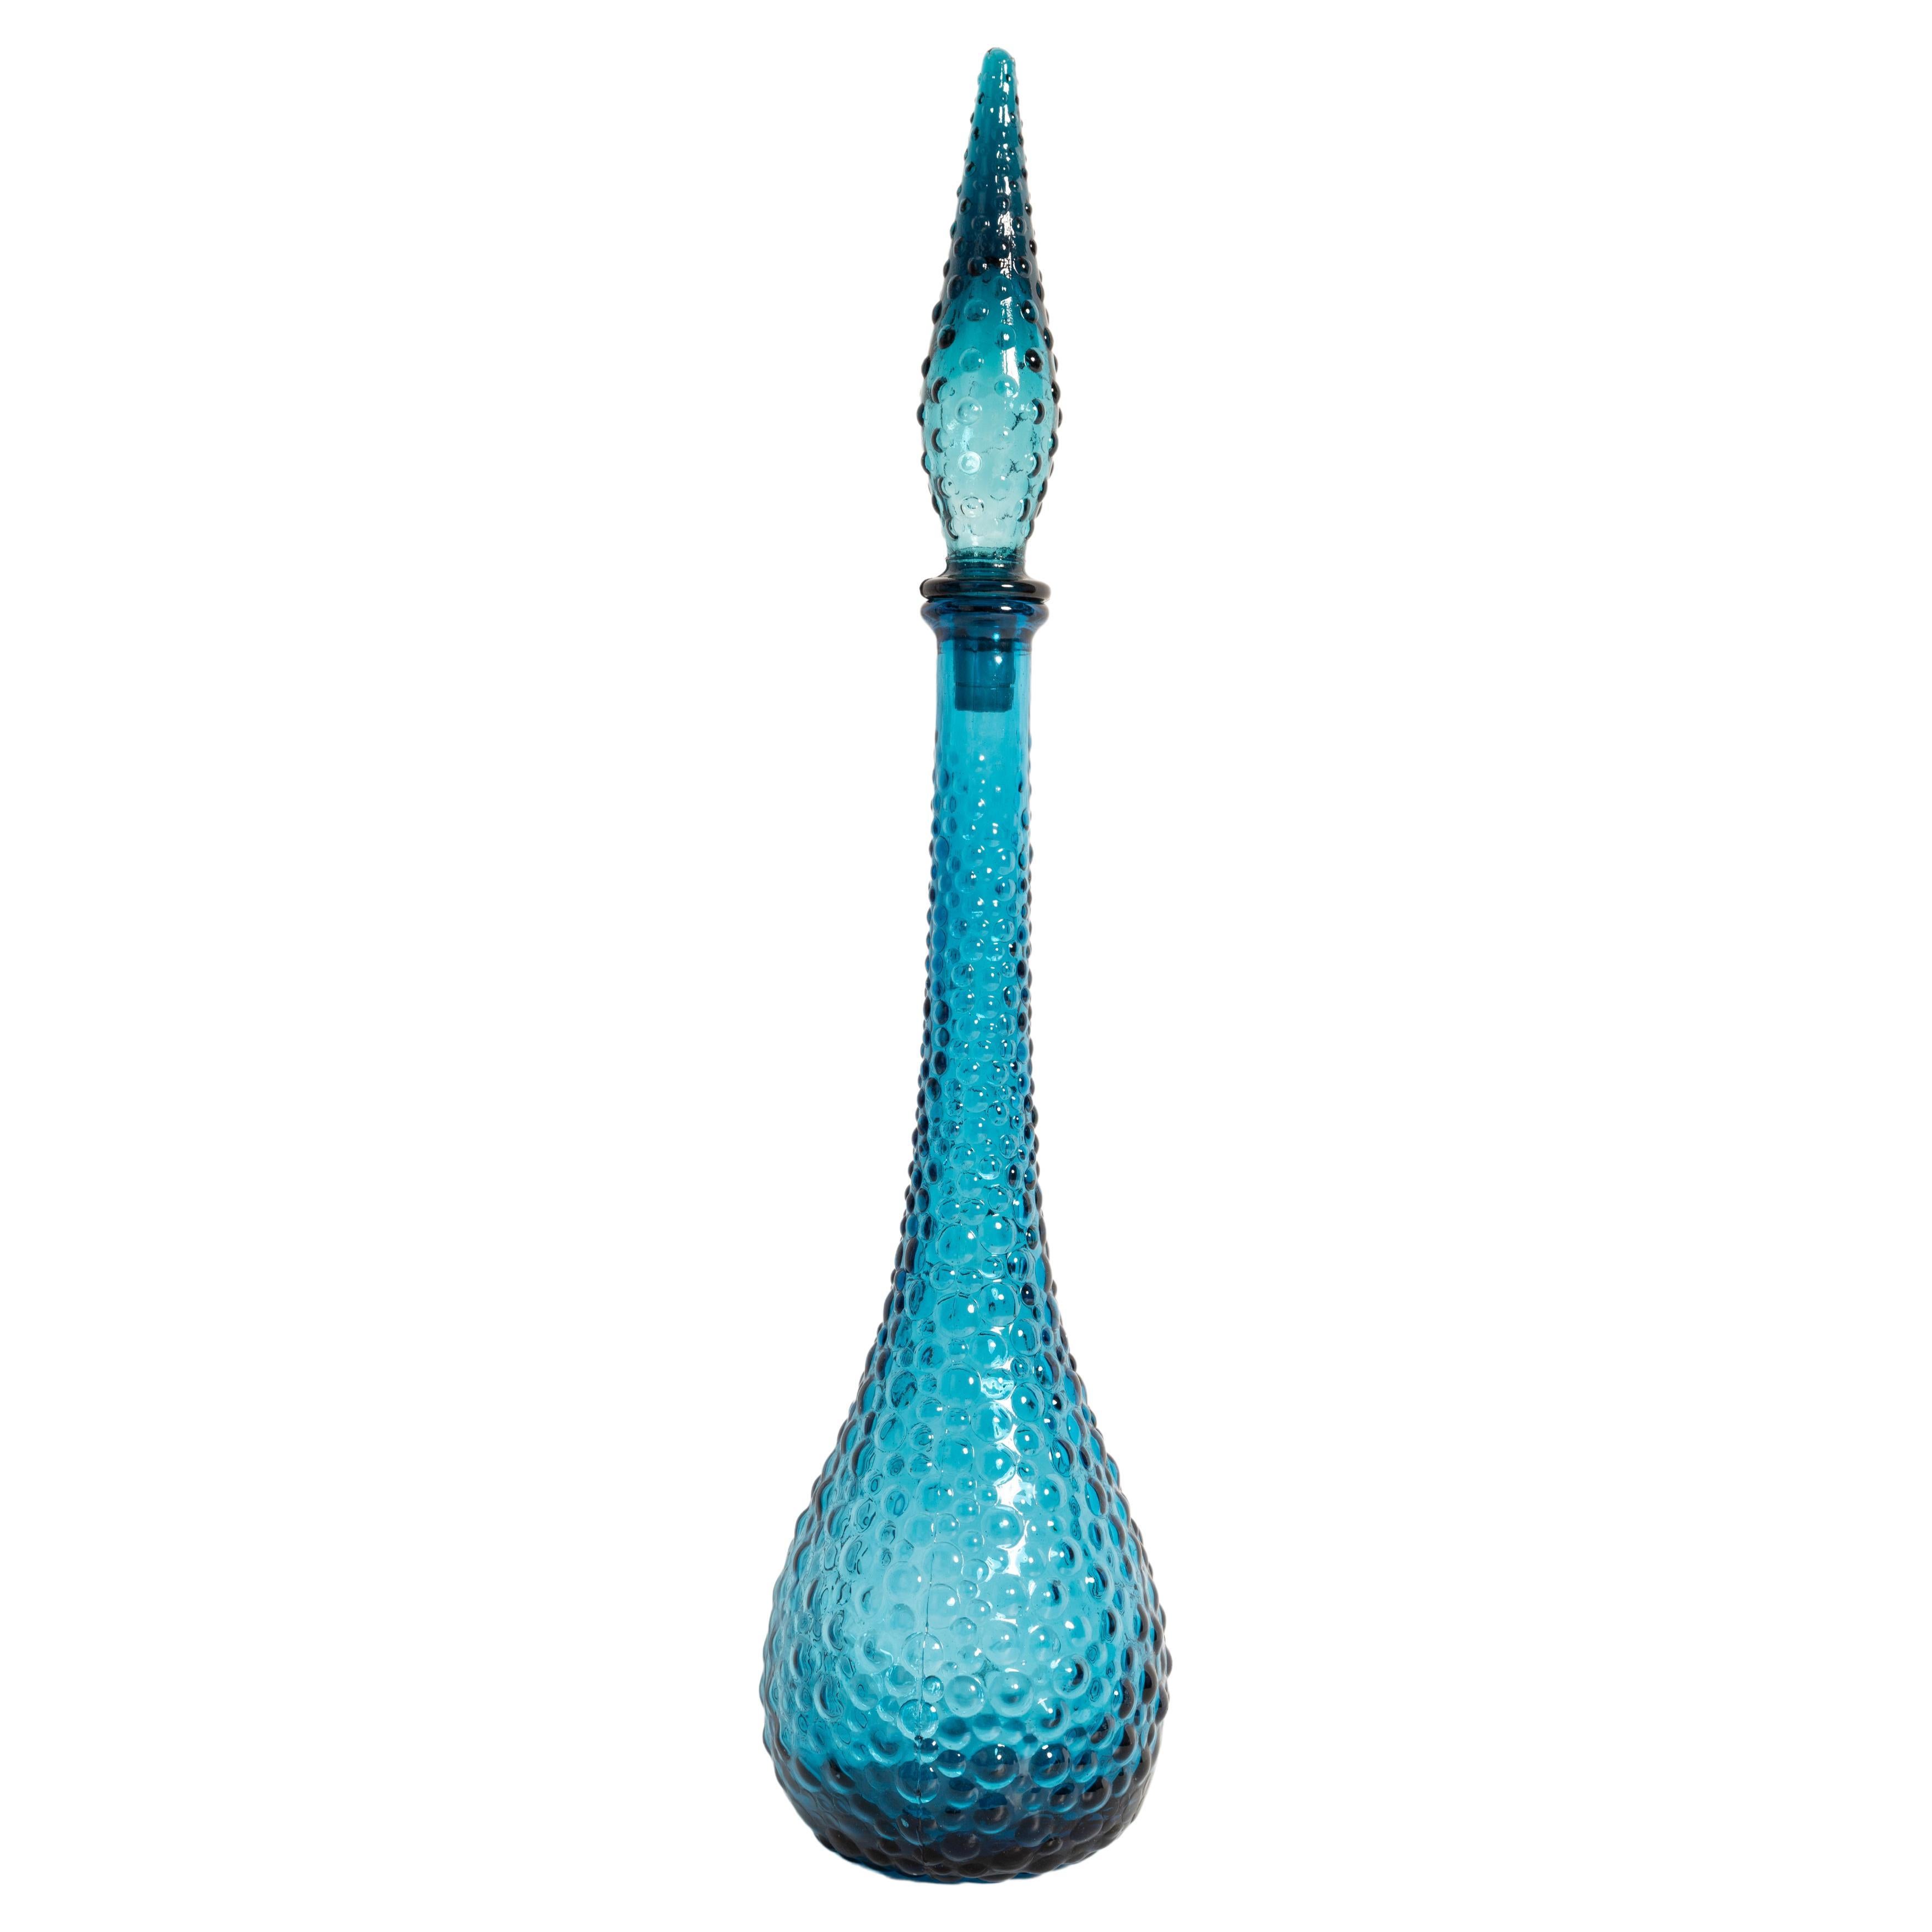 Blue Glass Genie Decanter Bottle with Stopper, 20th Century, Italy, 1960s